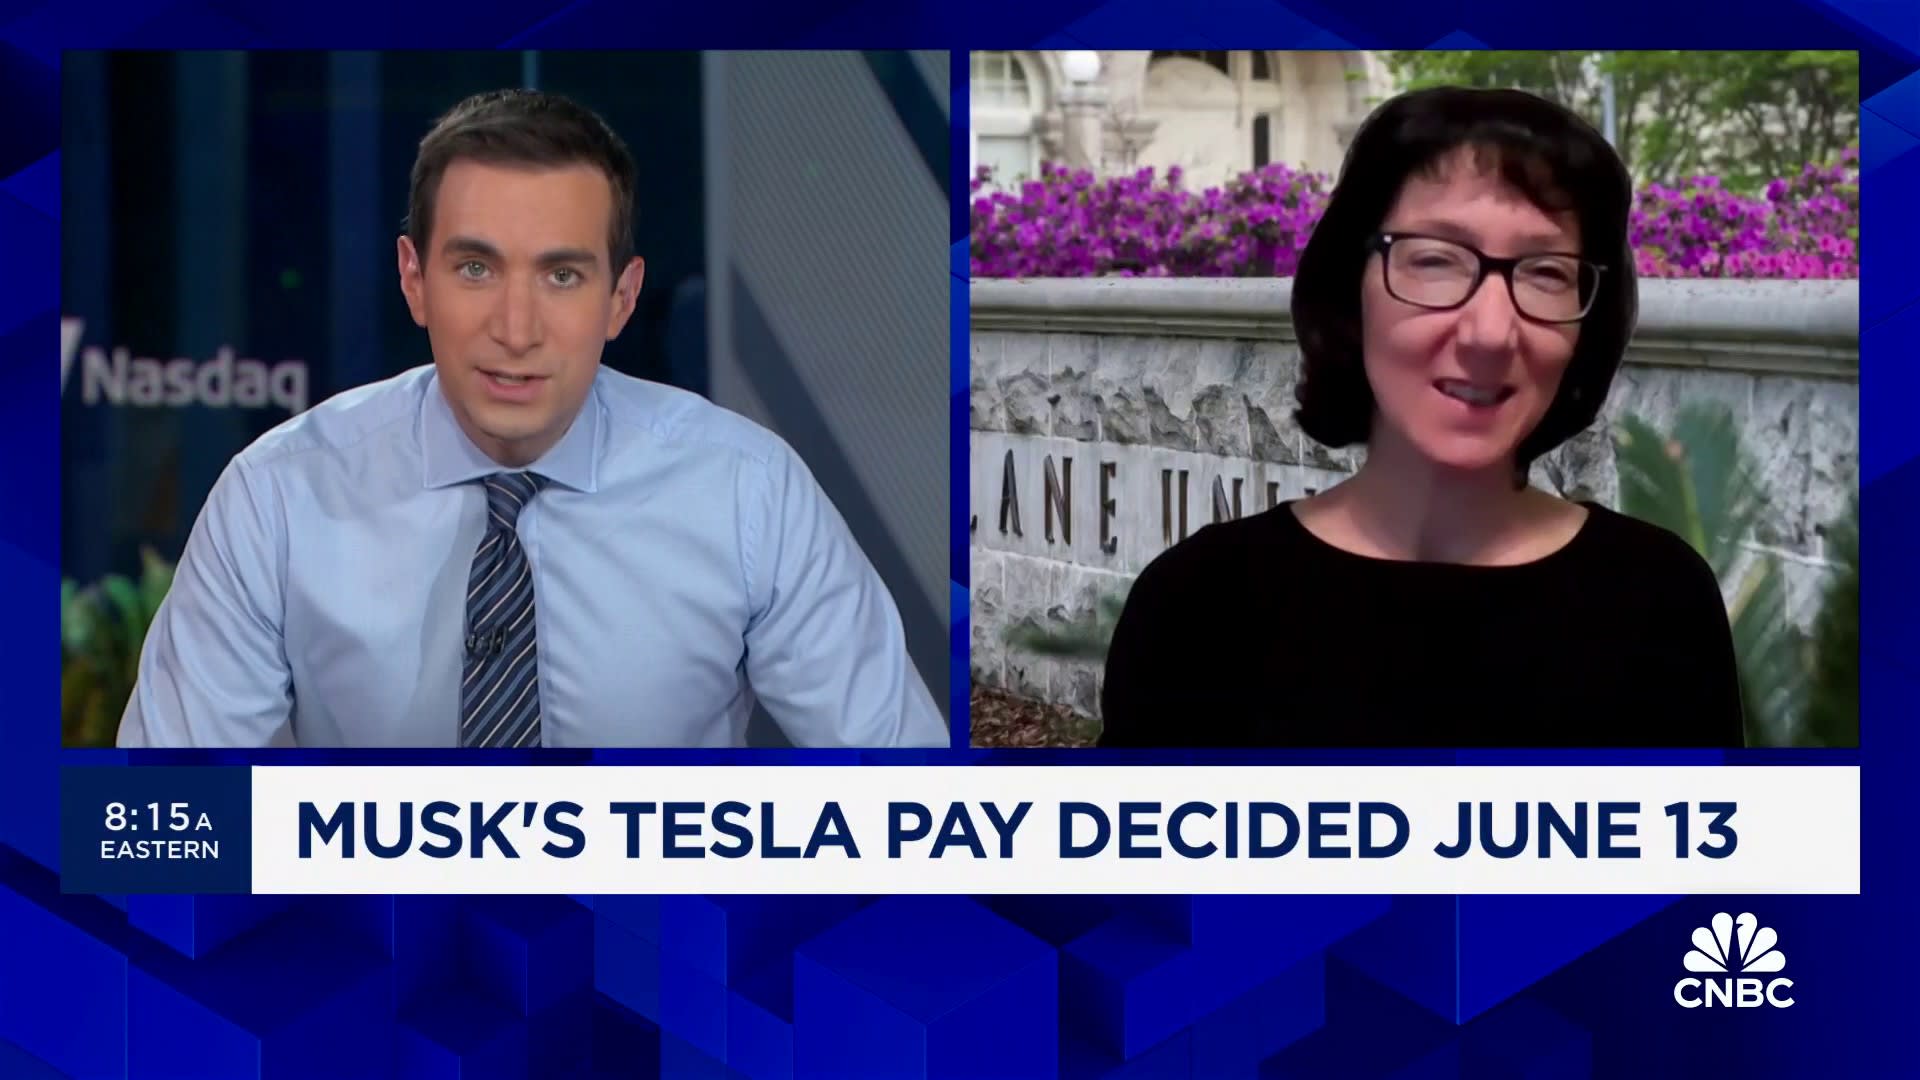 It's legally questionable whether Musk can undo the judge's ruling on Tesla pay: Tulane's Ann Lipton